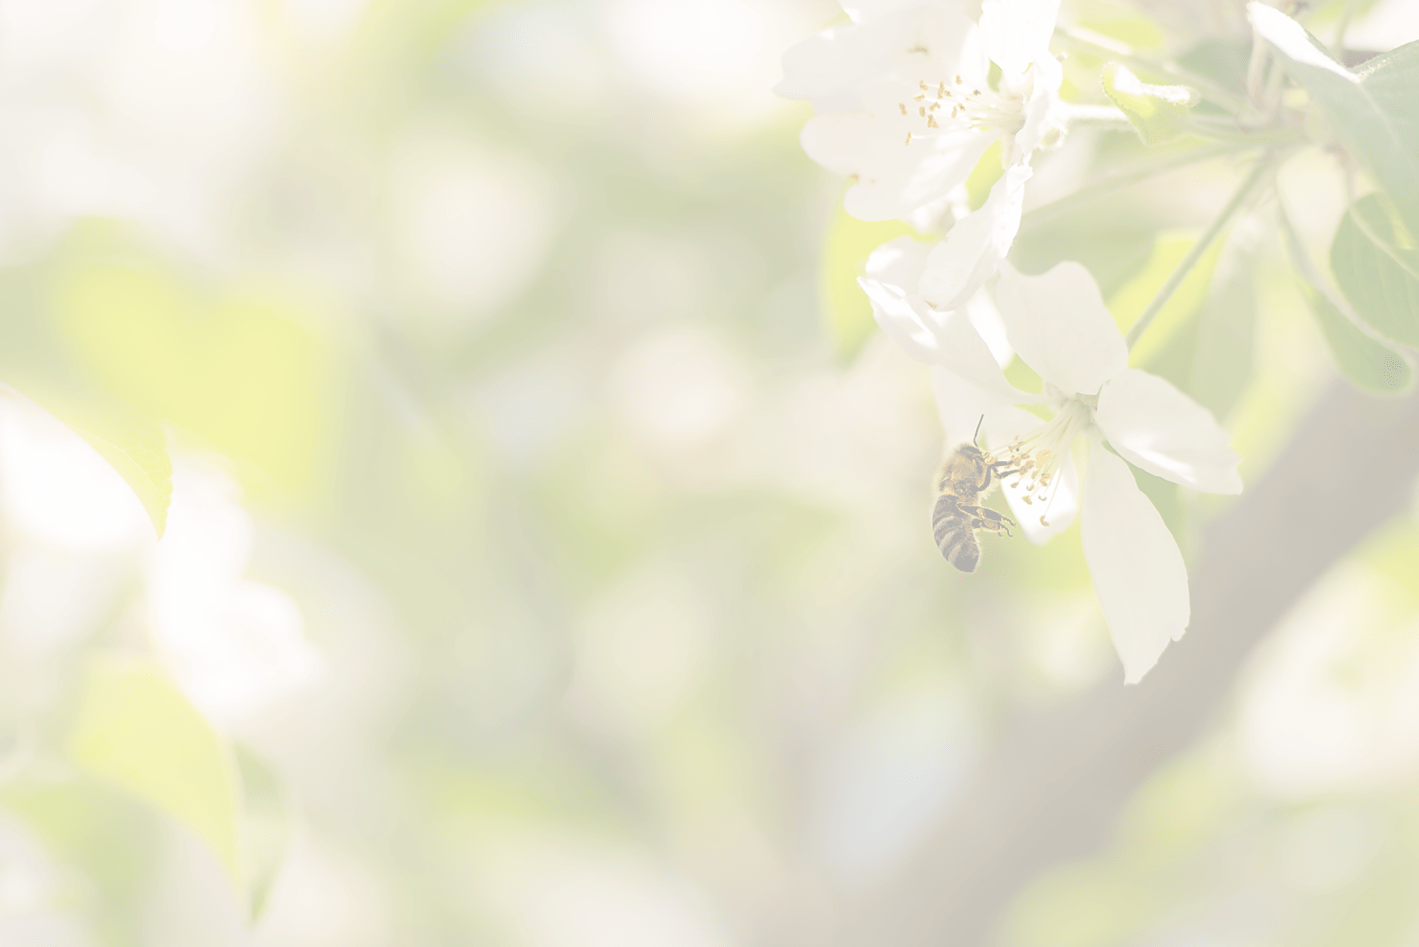 Honey bee is collecting pollen on a blossoming apple tree against blurred background.